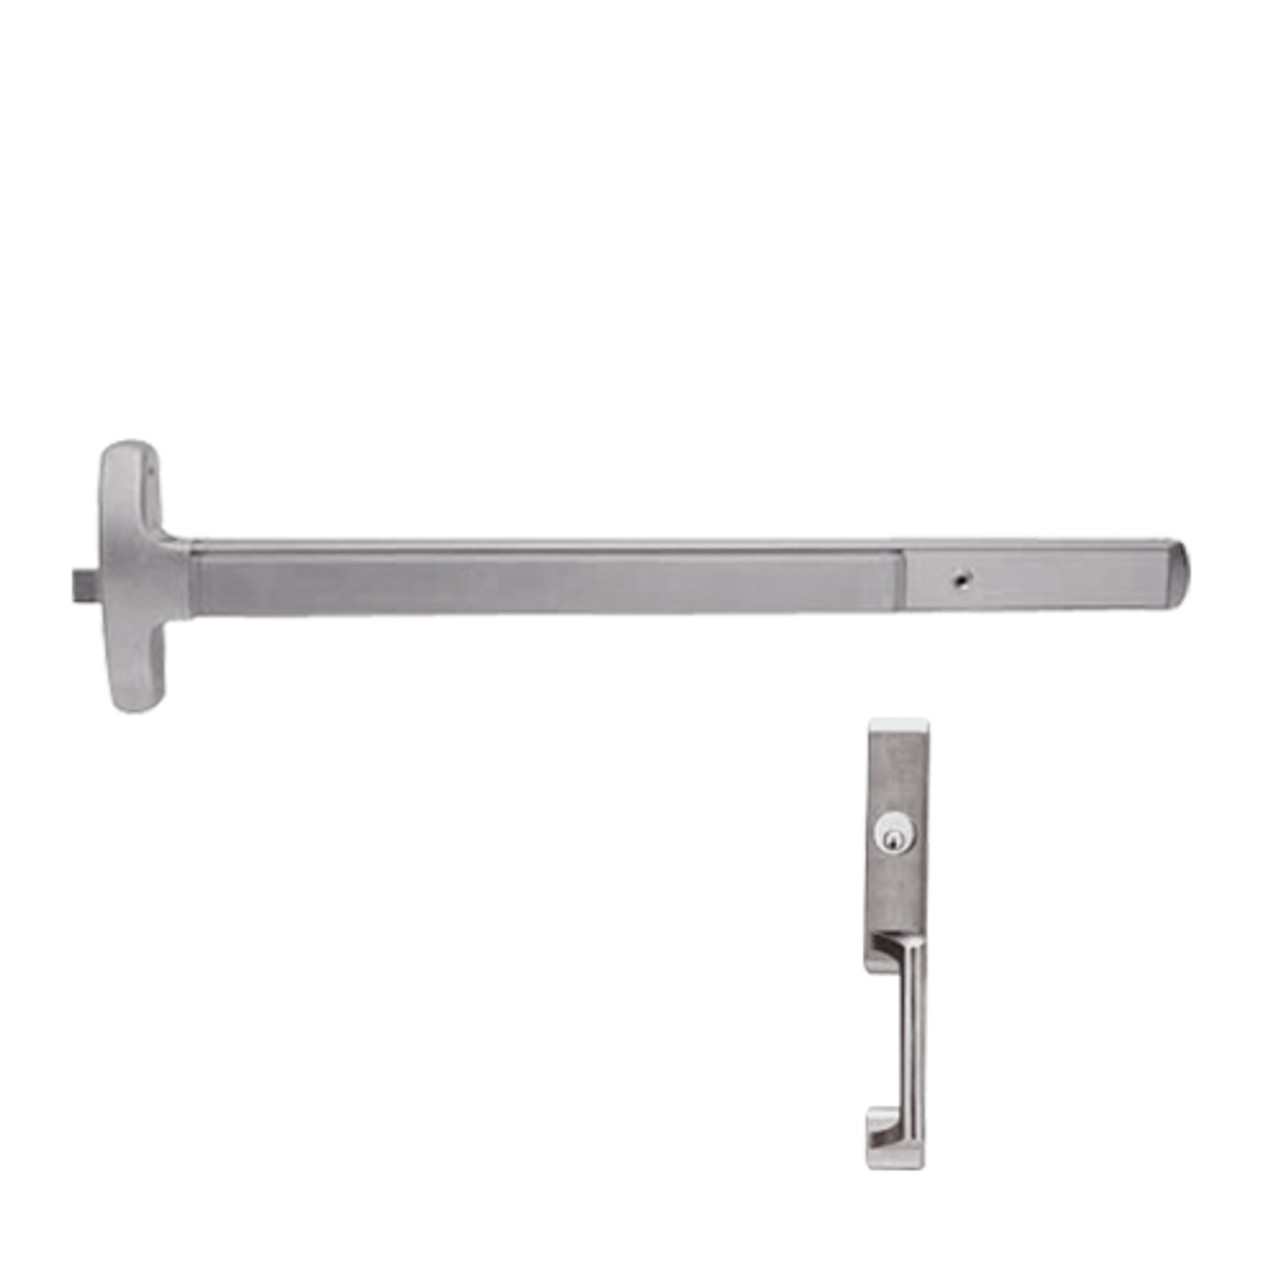 24-R-NL-US32D-3-LHR Falcon Exit Device in Satin Stainless Steel